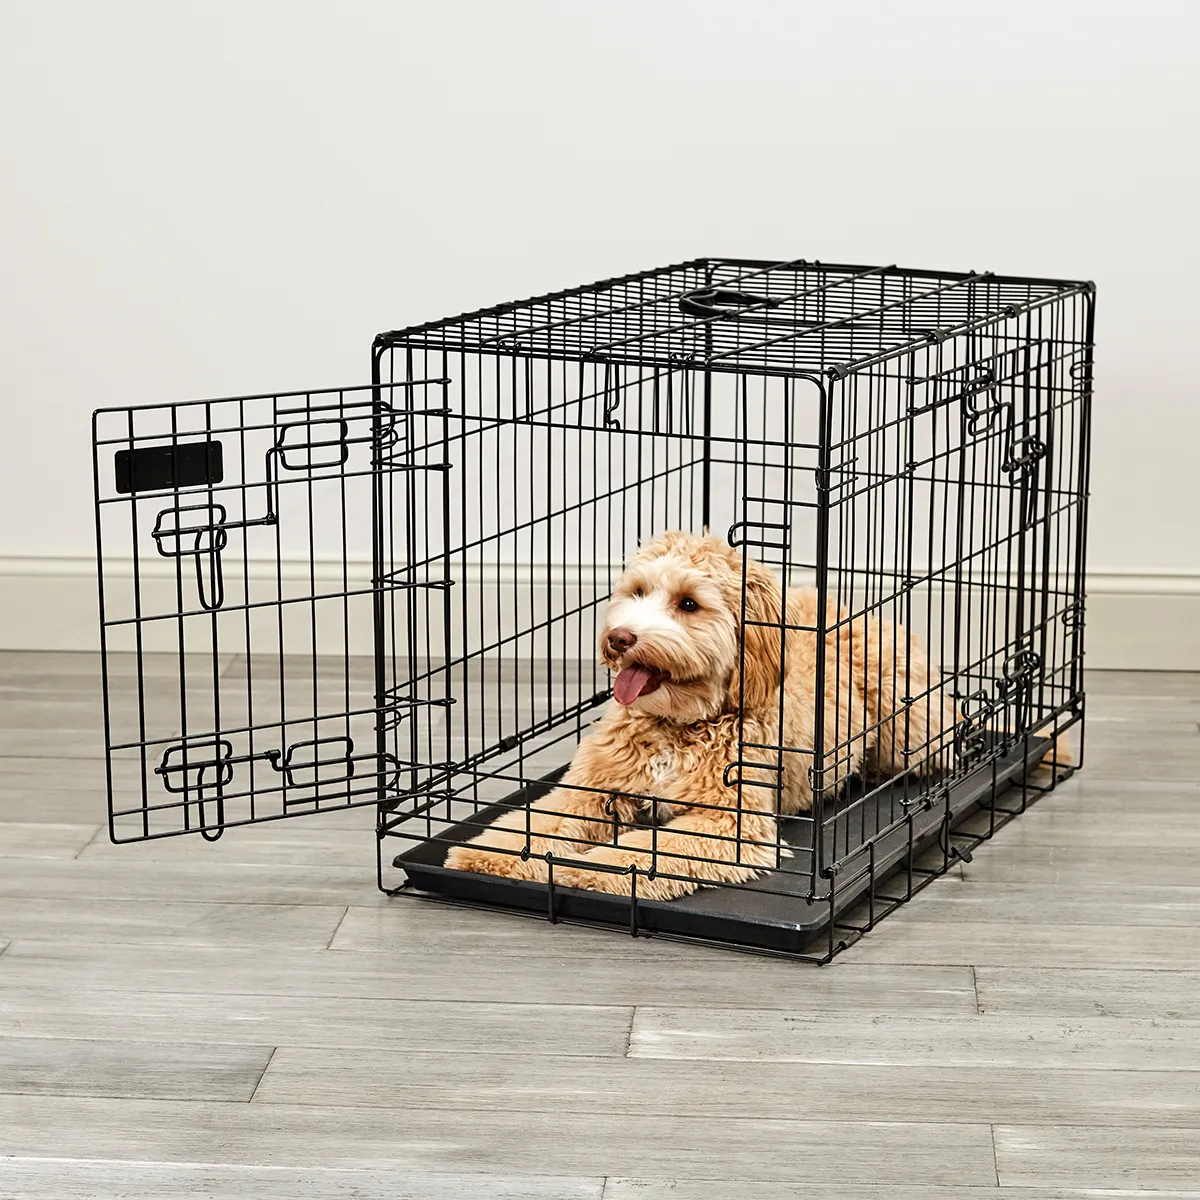 Stainless Steel Foldable Pet Crates, Heavy Duty Dog Cage и Kennels, Big Strong Metal Iron, large Size, Extra Large 90 см